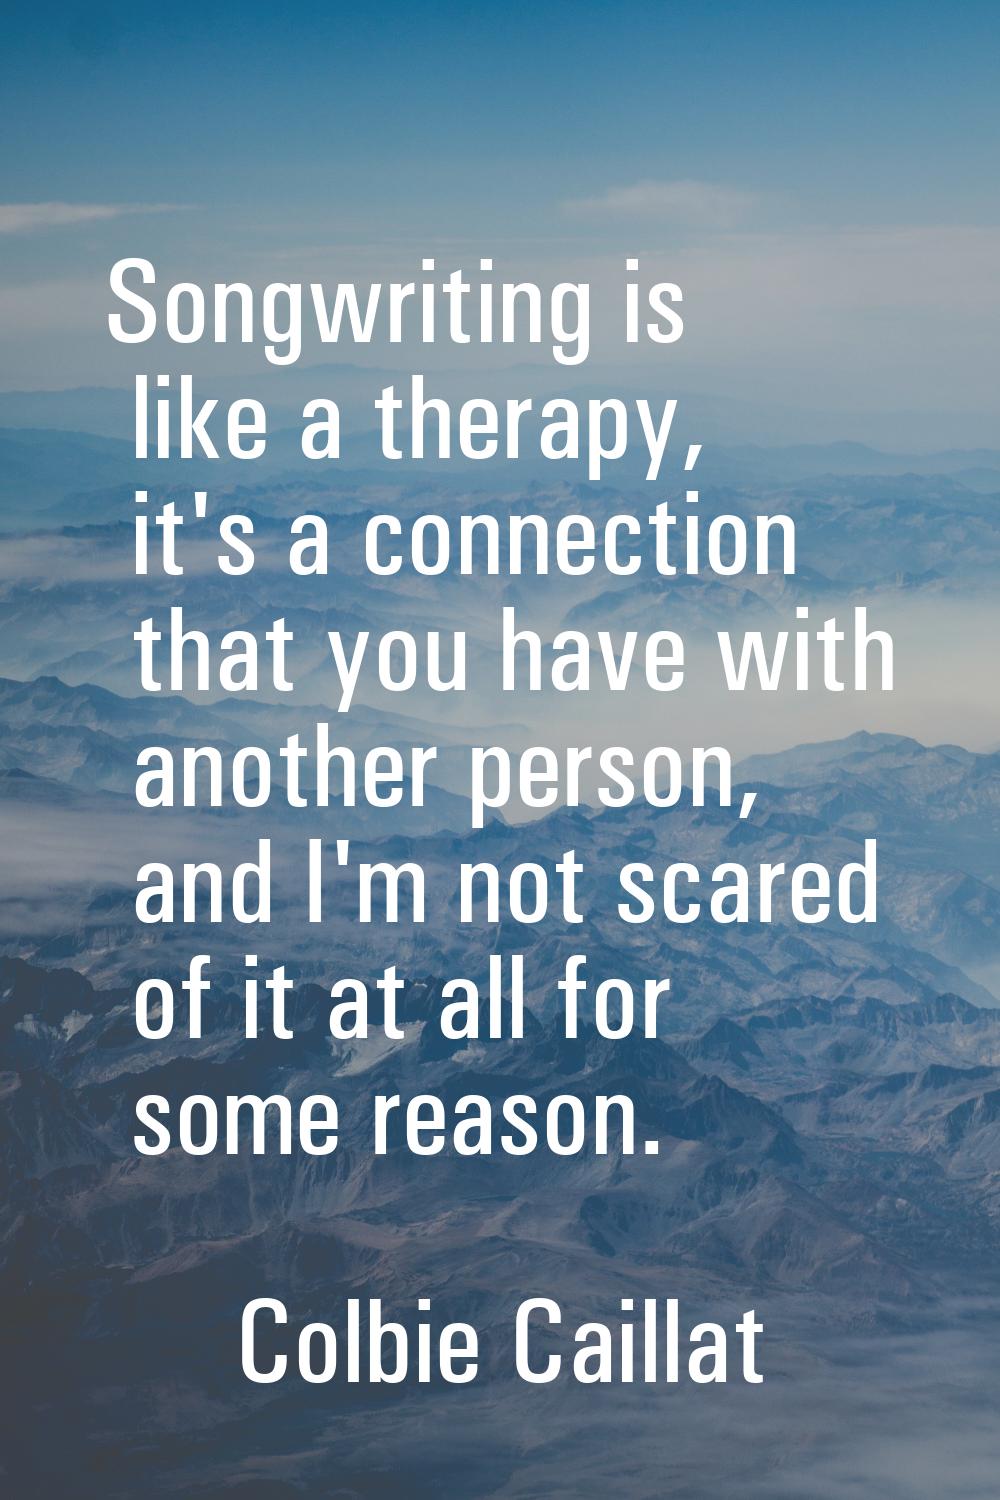 Songwriting is like a therapy, it's a connection that you have with another person, and I'm not sca